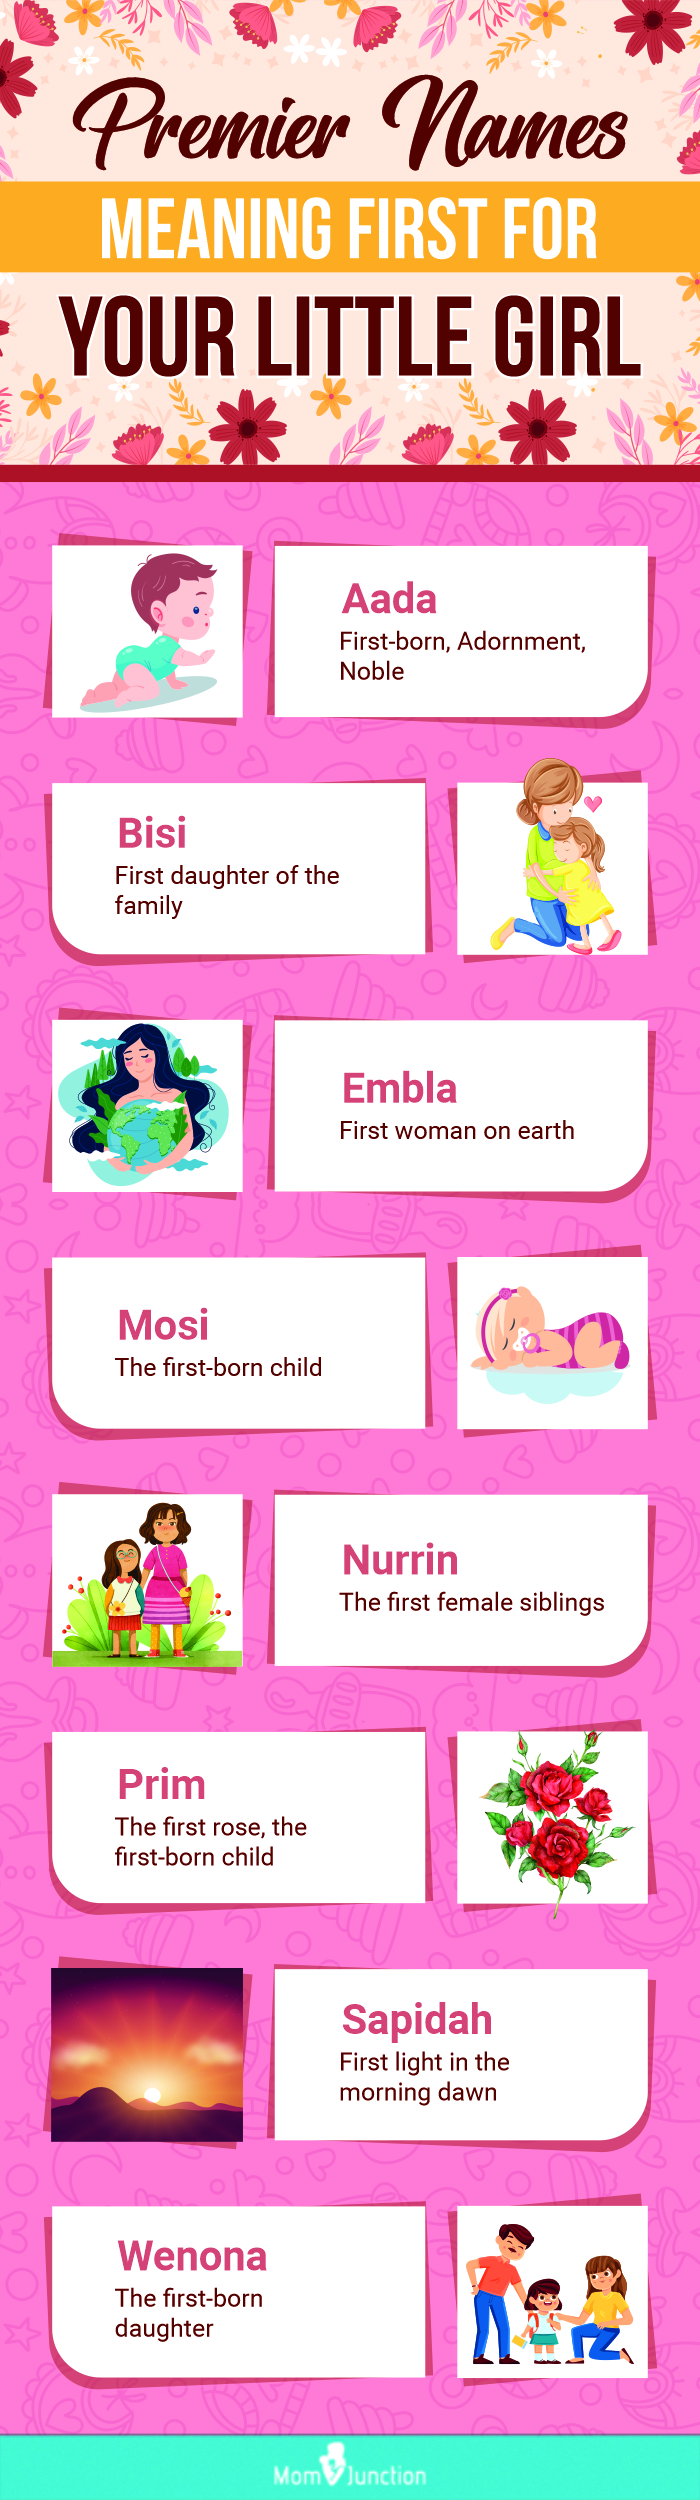 premier names meaning first for your little girl (infographic)